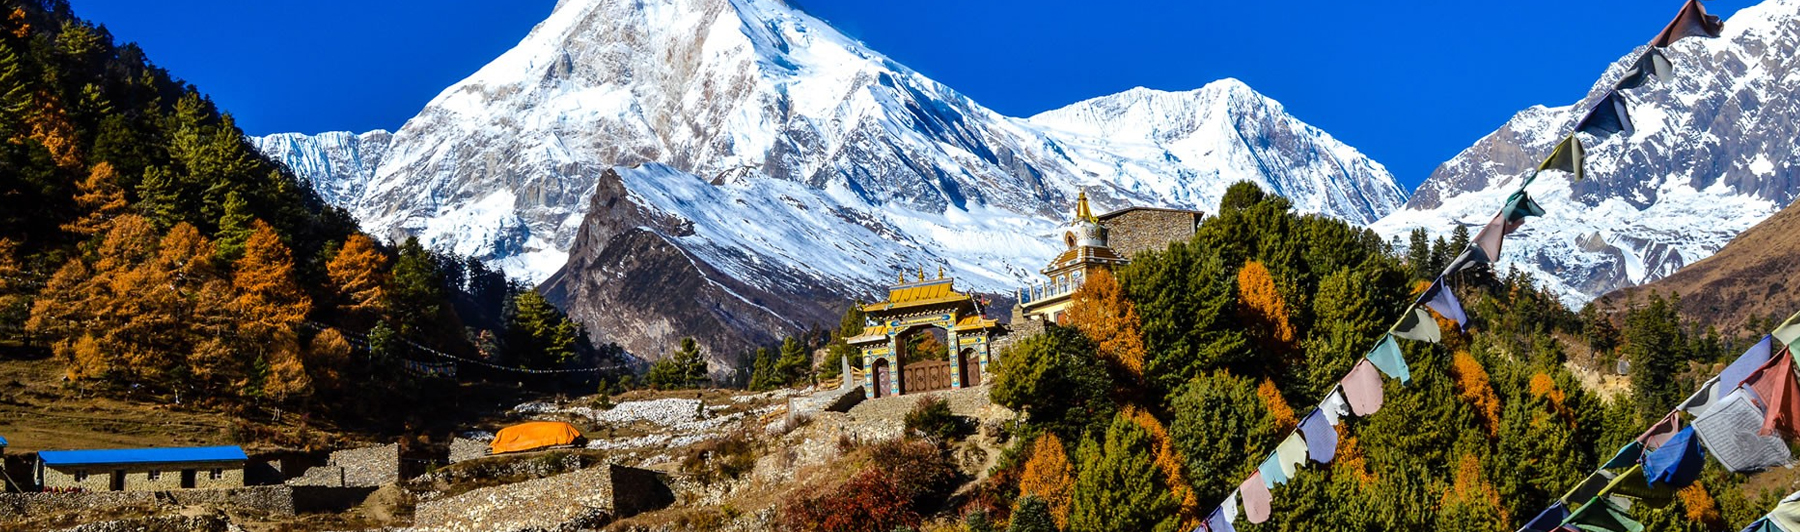 what are the places to visit in nepal